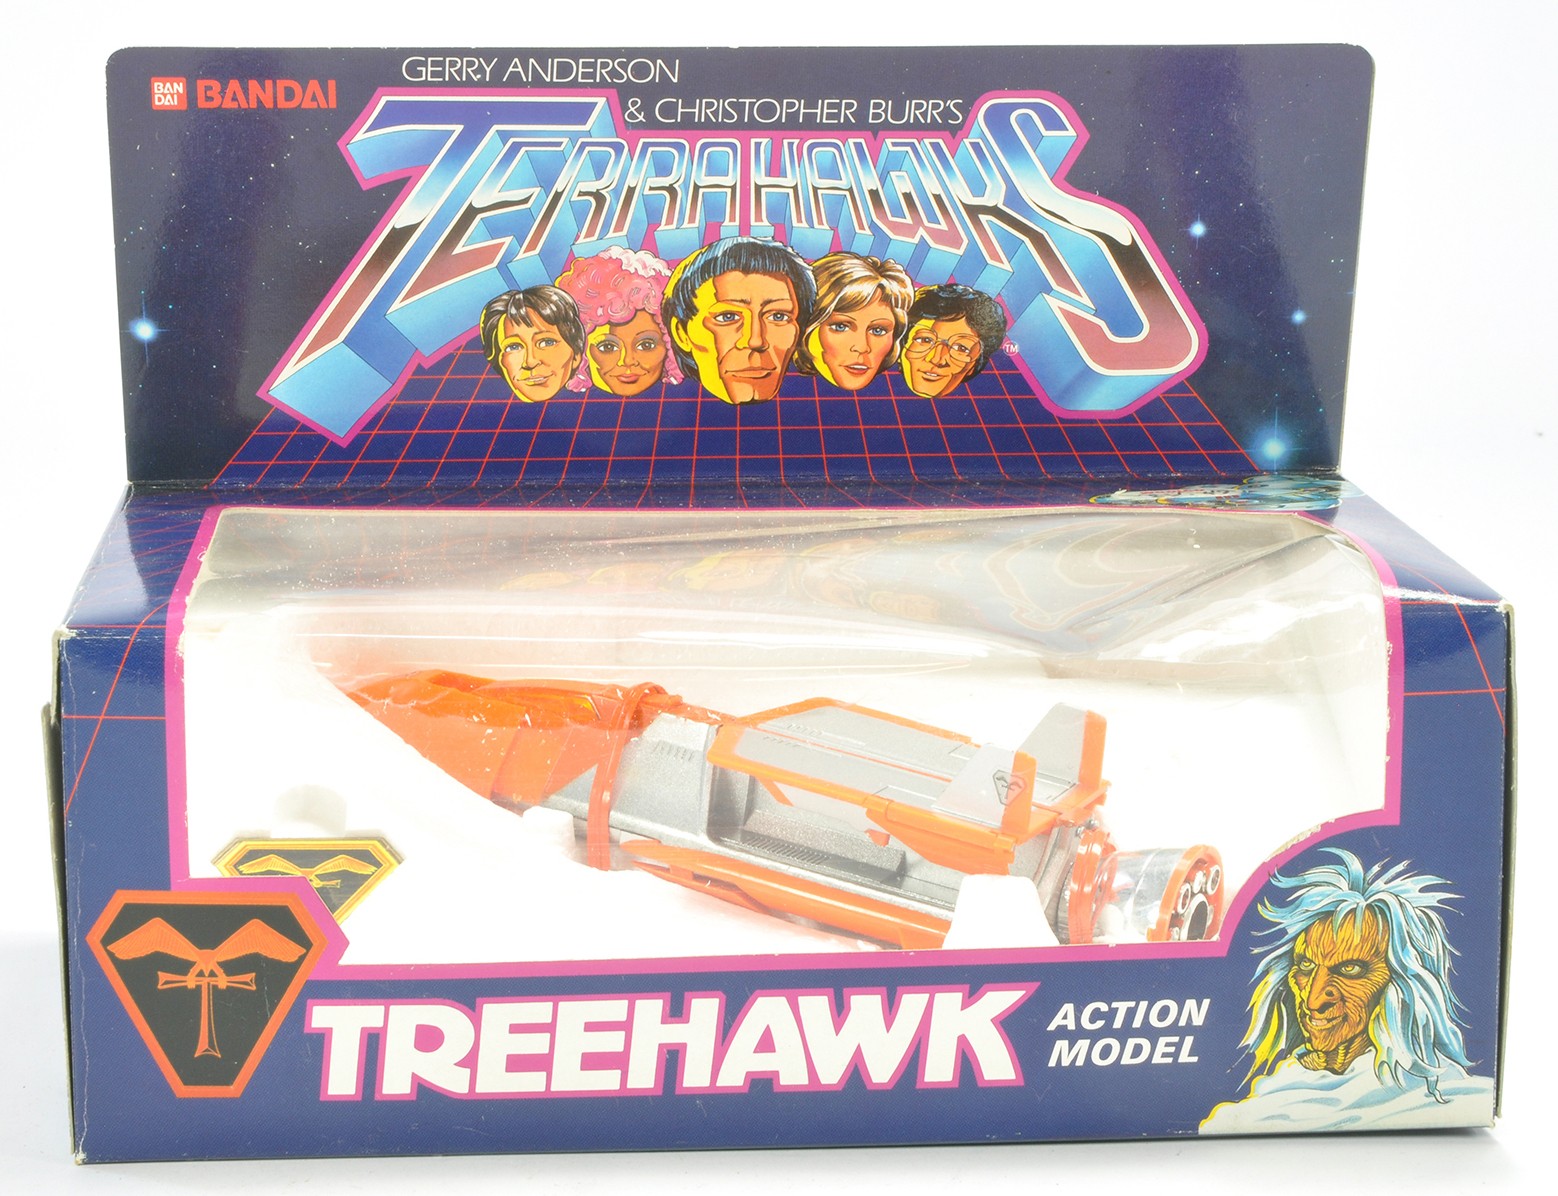 Bandai No. 0988703 Gerry Anderson's Terrahawks Treehawk Action Model. Complete and secured in box in